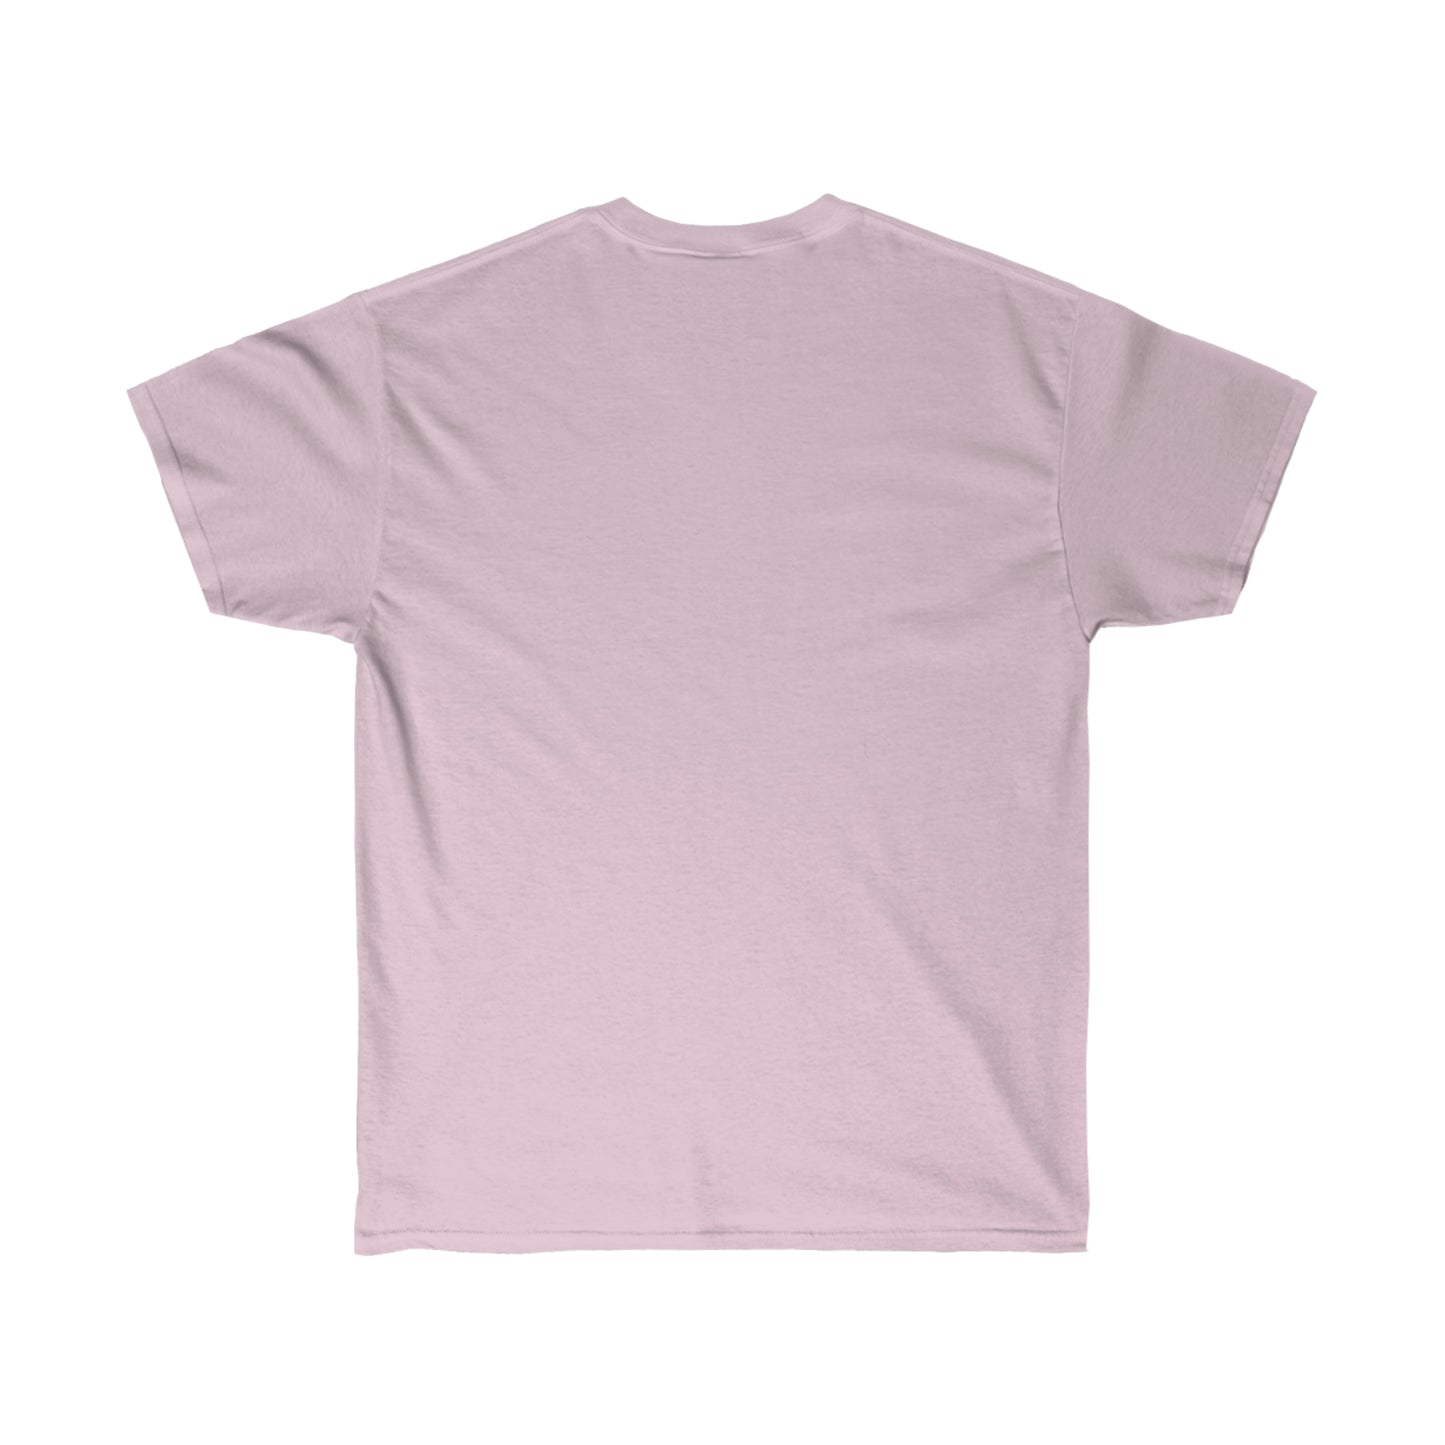 Disappear Into The Pages Unisex Ultra Cotton Tee